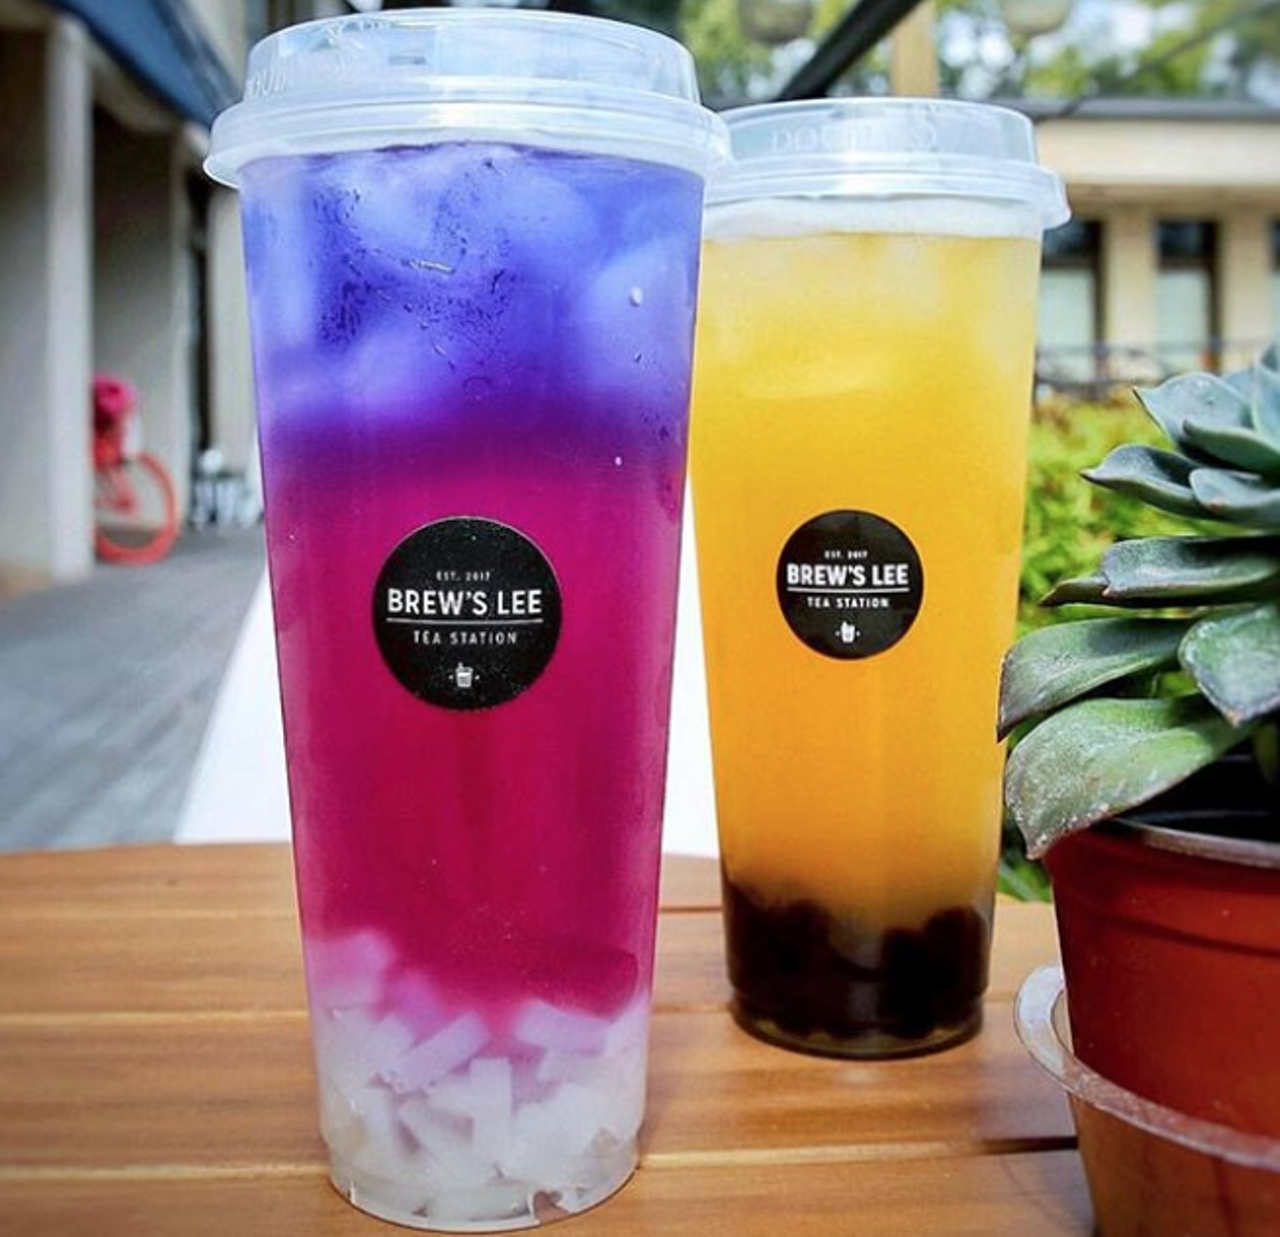 Brew's Lee Tea Station
4009 Broadway St, brewsleetea.com
Bubble tea is served up any which way you want at this cute Alamo Heights shop that also specializes in noodle dishes and rice bowls.
Photo via Instagram / s.a.foodie